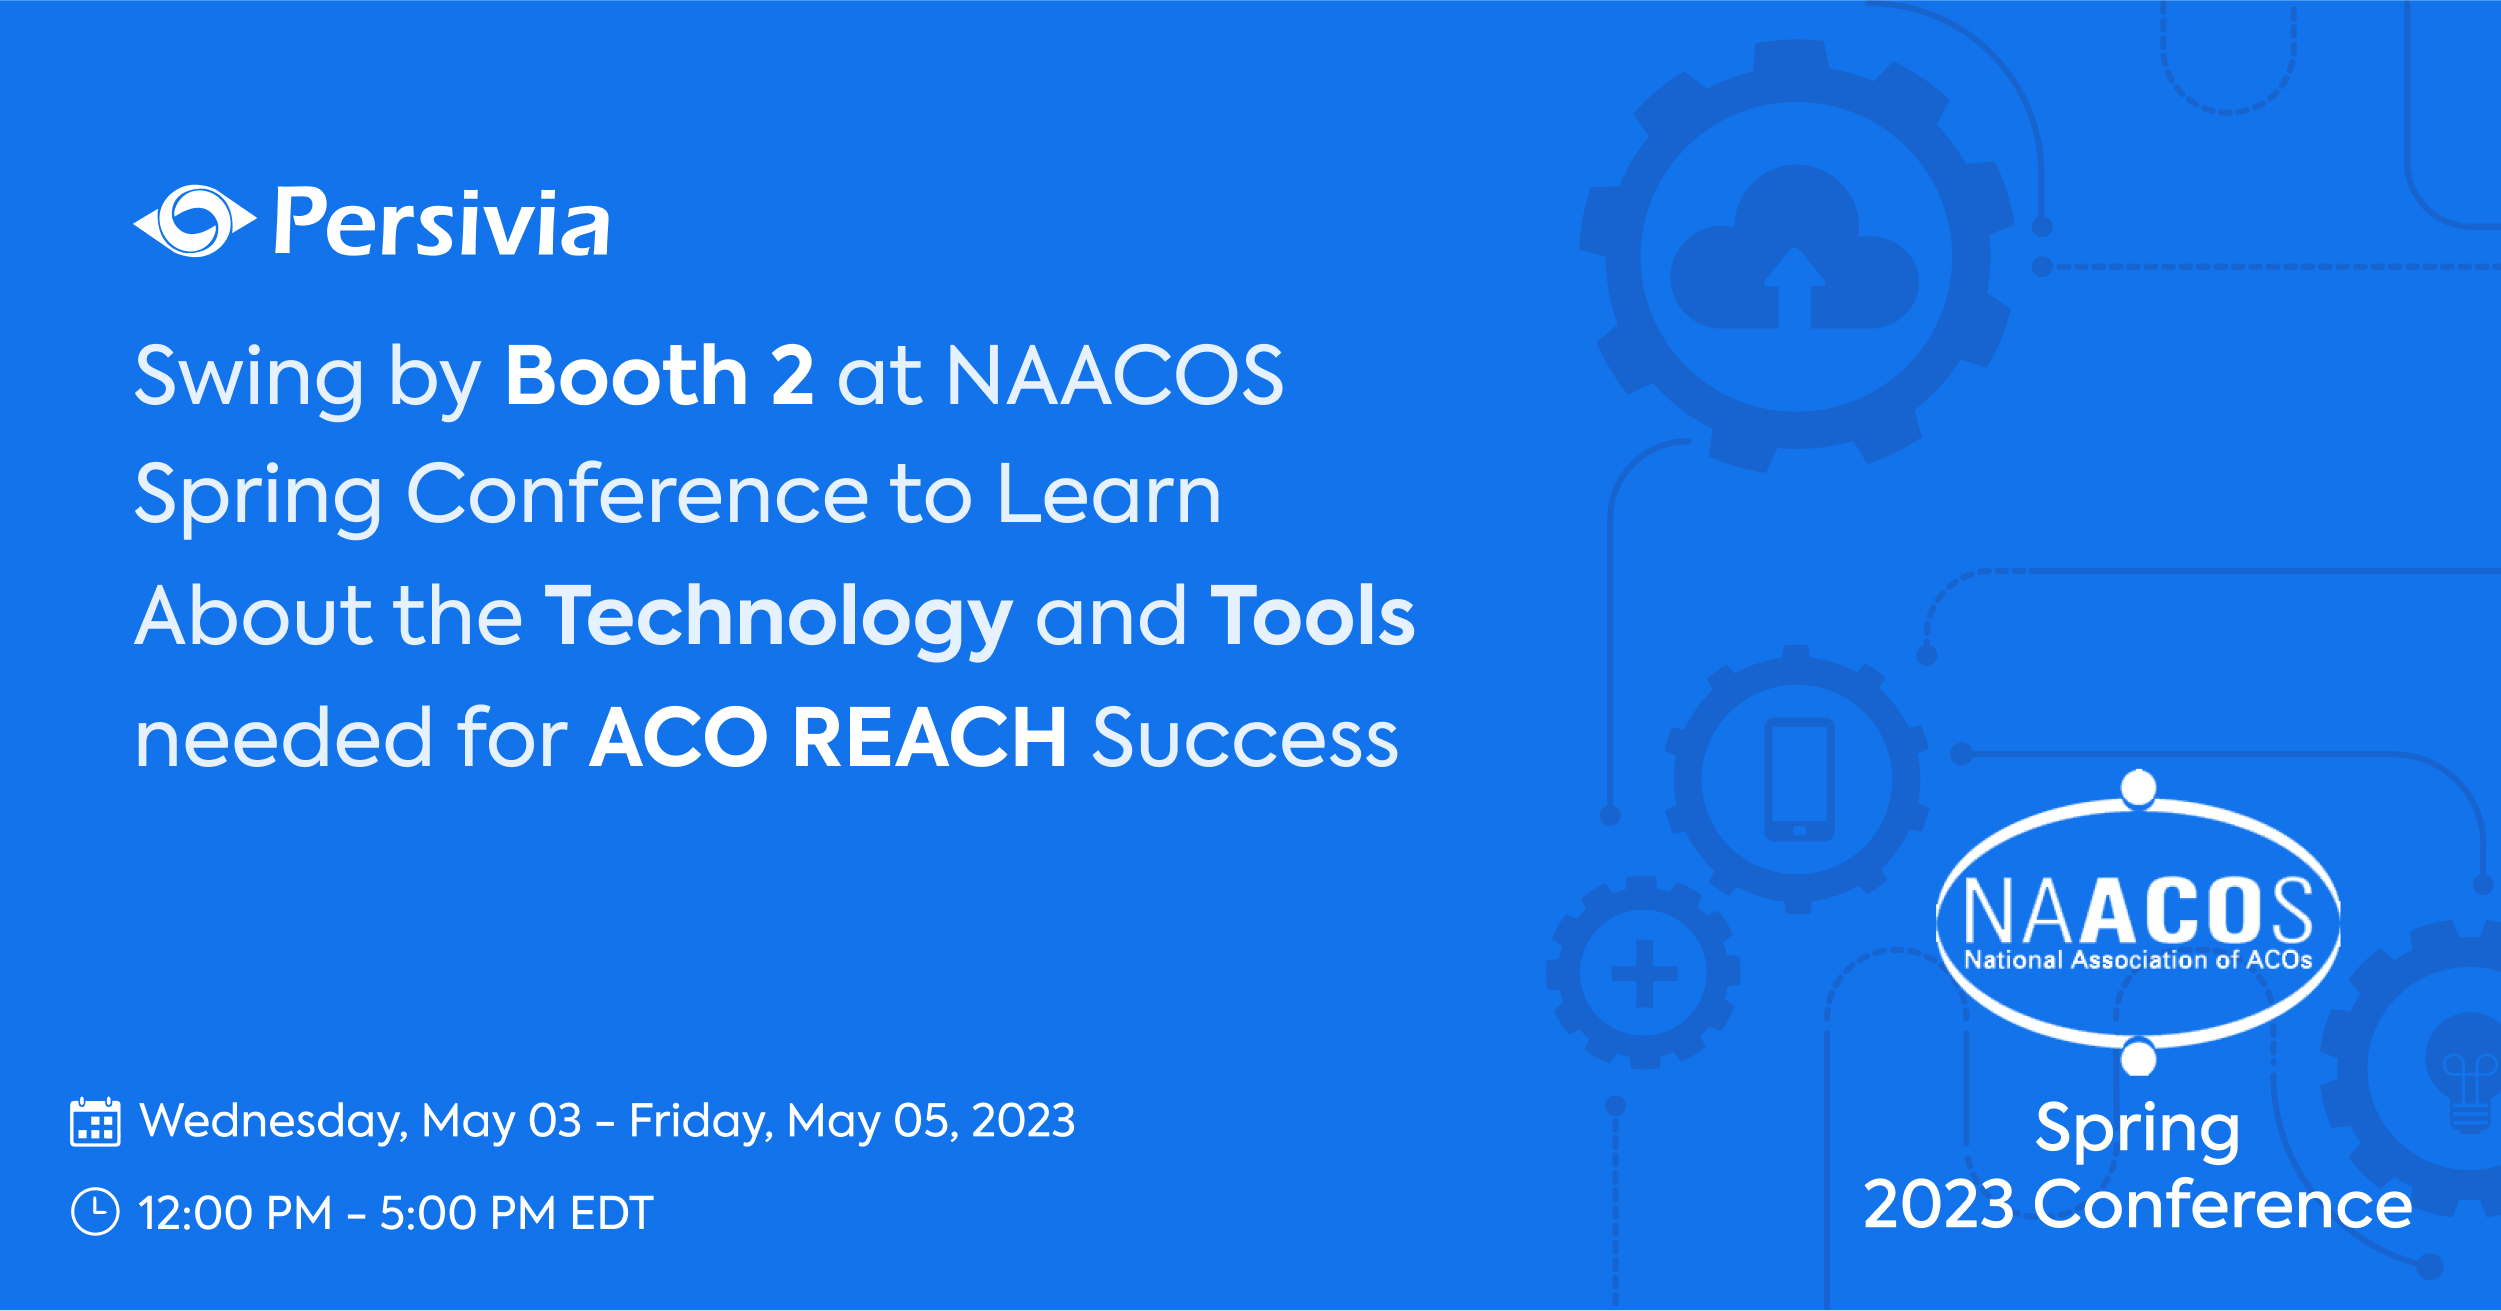 NAACOS Spring 2023 Conference